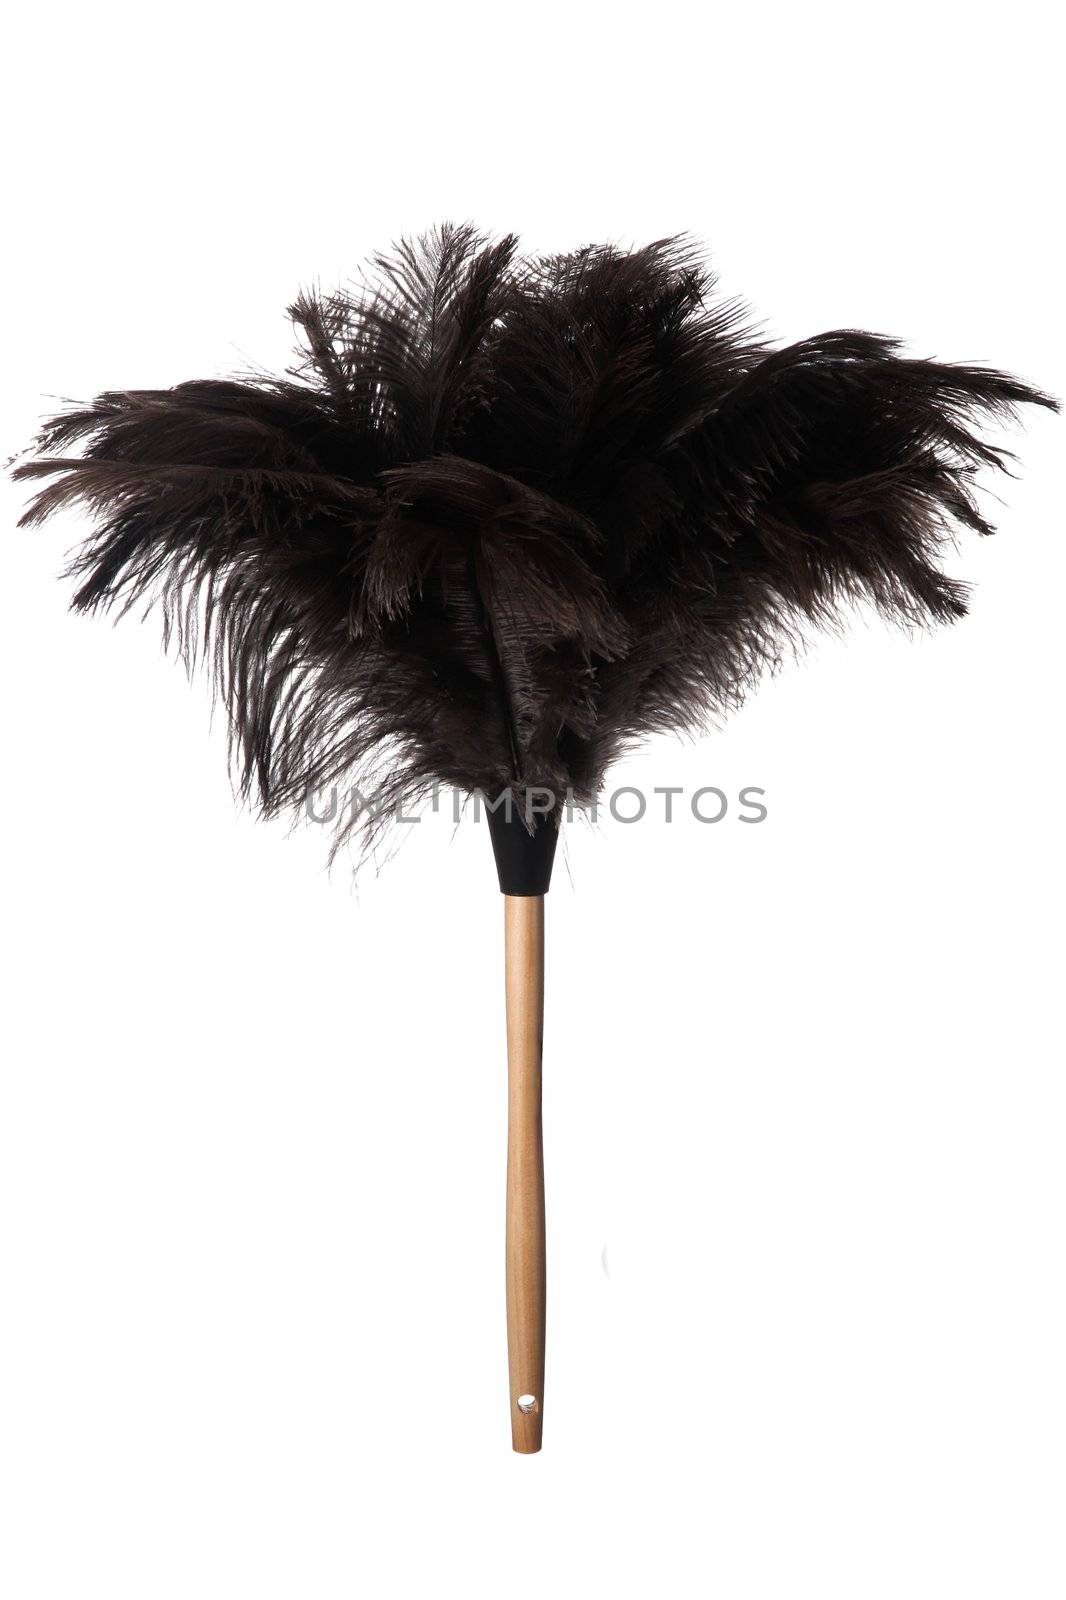 Ostrich Feather Duster by fouroaks